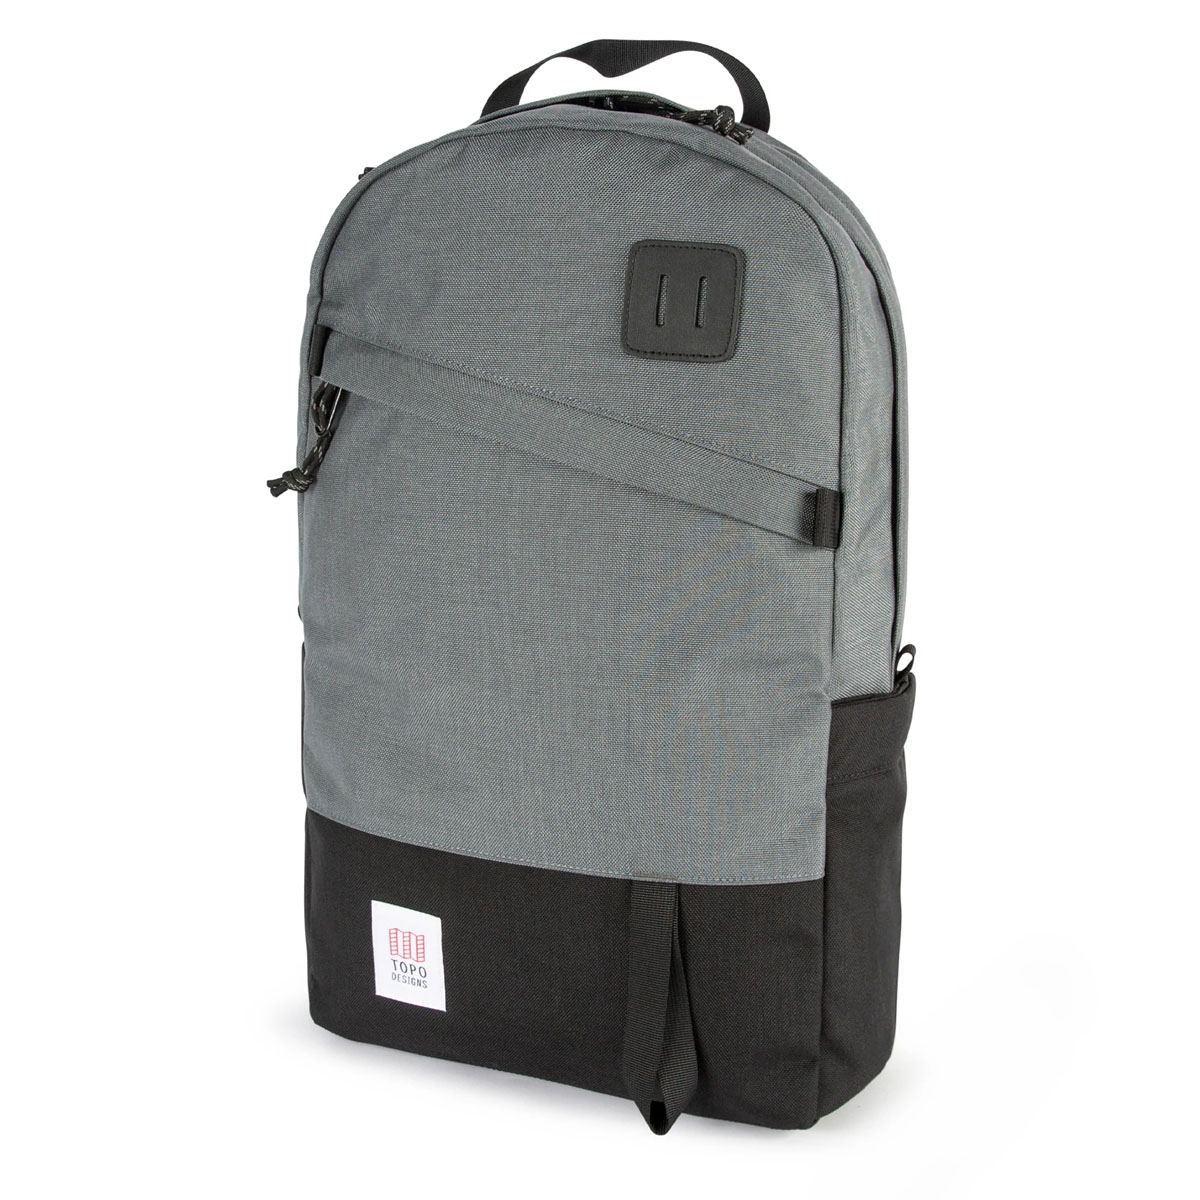 https://www.beaubags.com/media/catalog/product/t/o/topo-designs-daypack-classic-charcoal-black-front-side.jpg